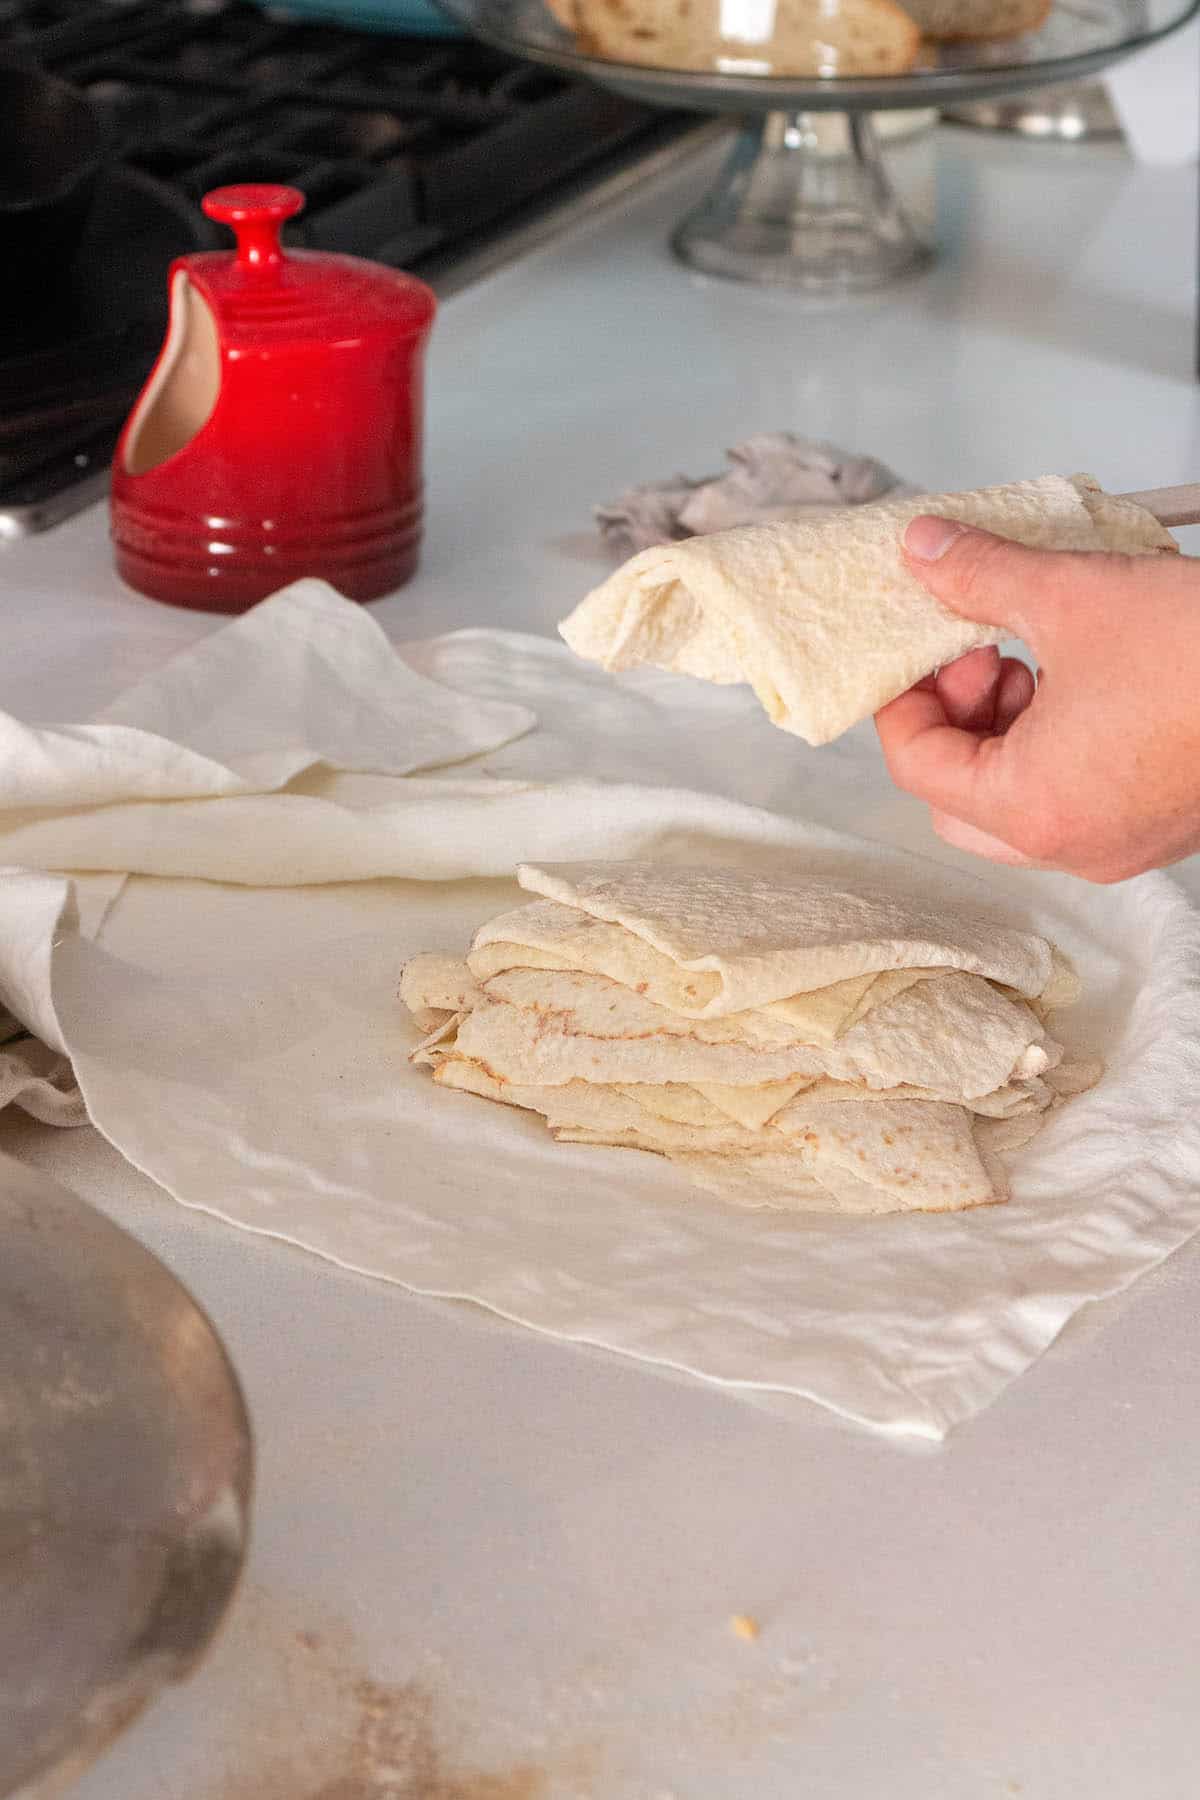 Pieces of lefse folded into triangles and stacked on one another inside a cloth towel too cool. 